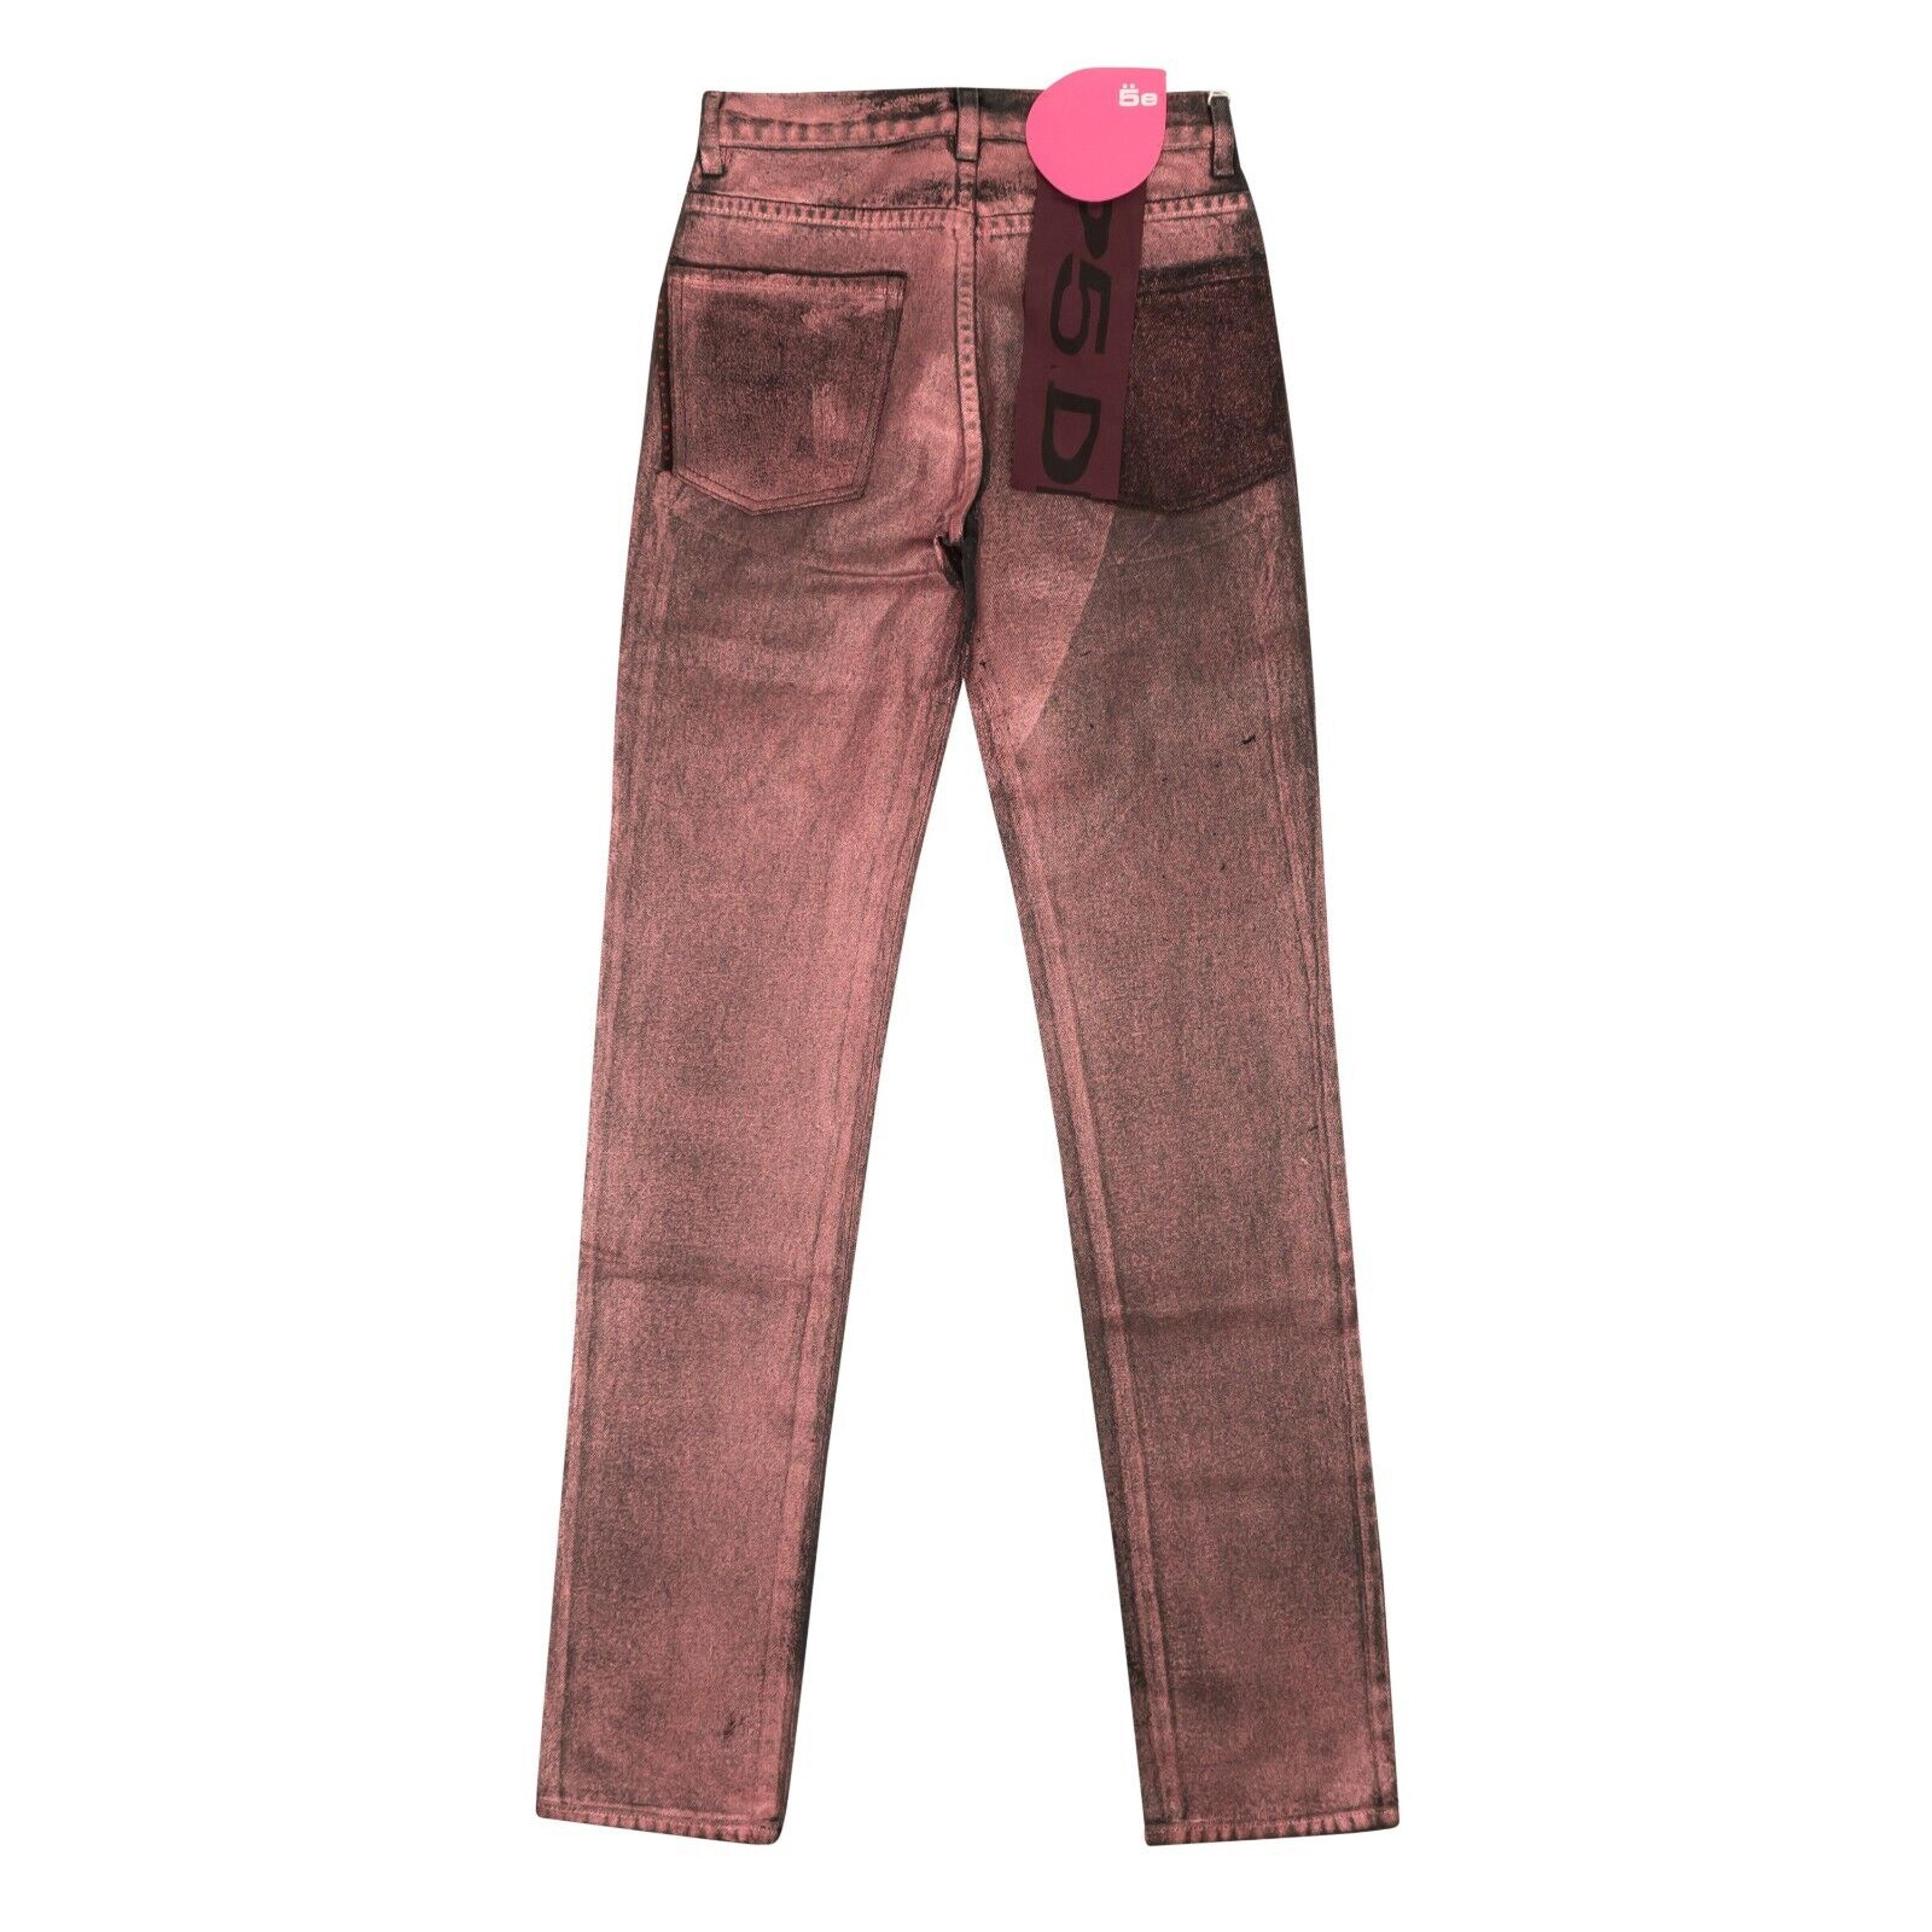 Alternate View 2 of Black And Pink Metallic Wash Jeans